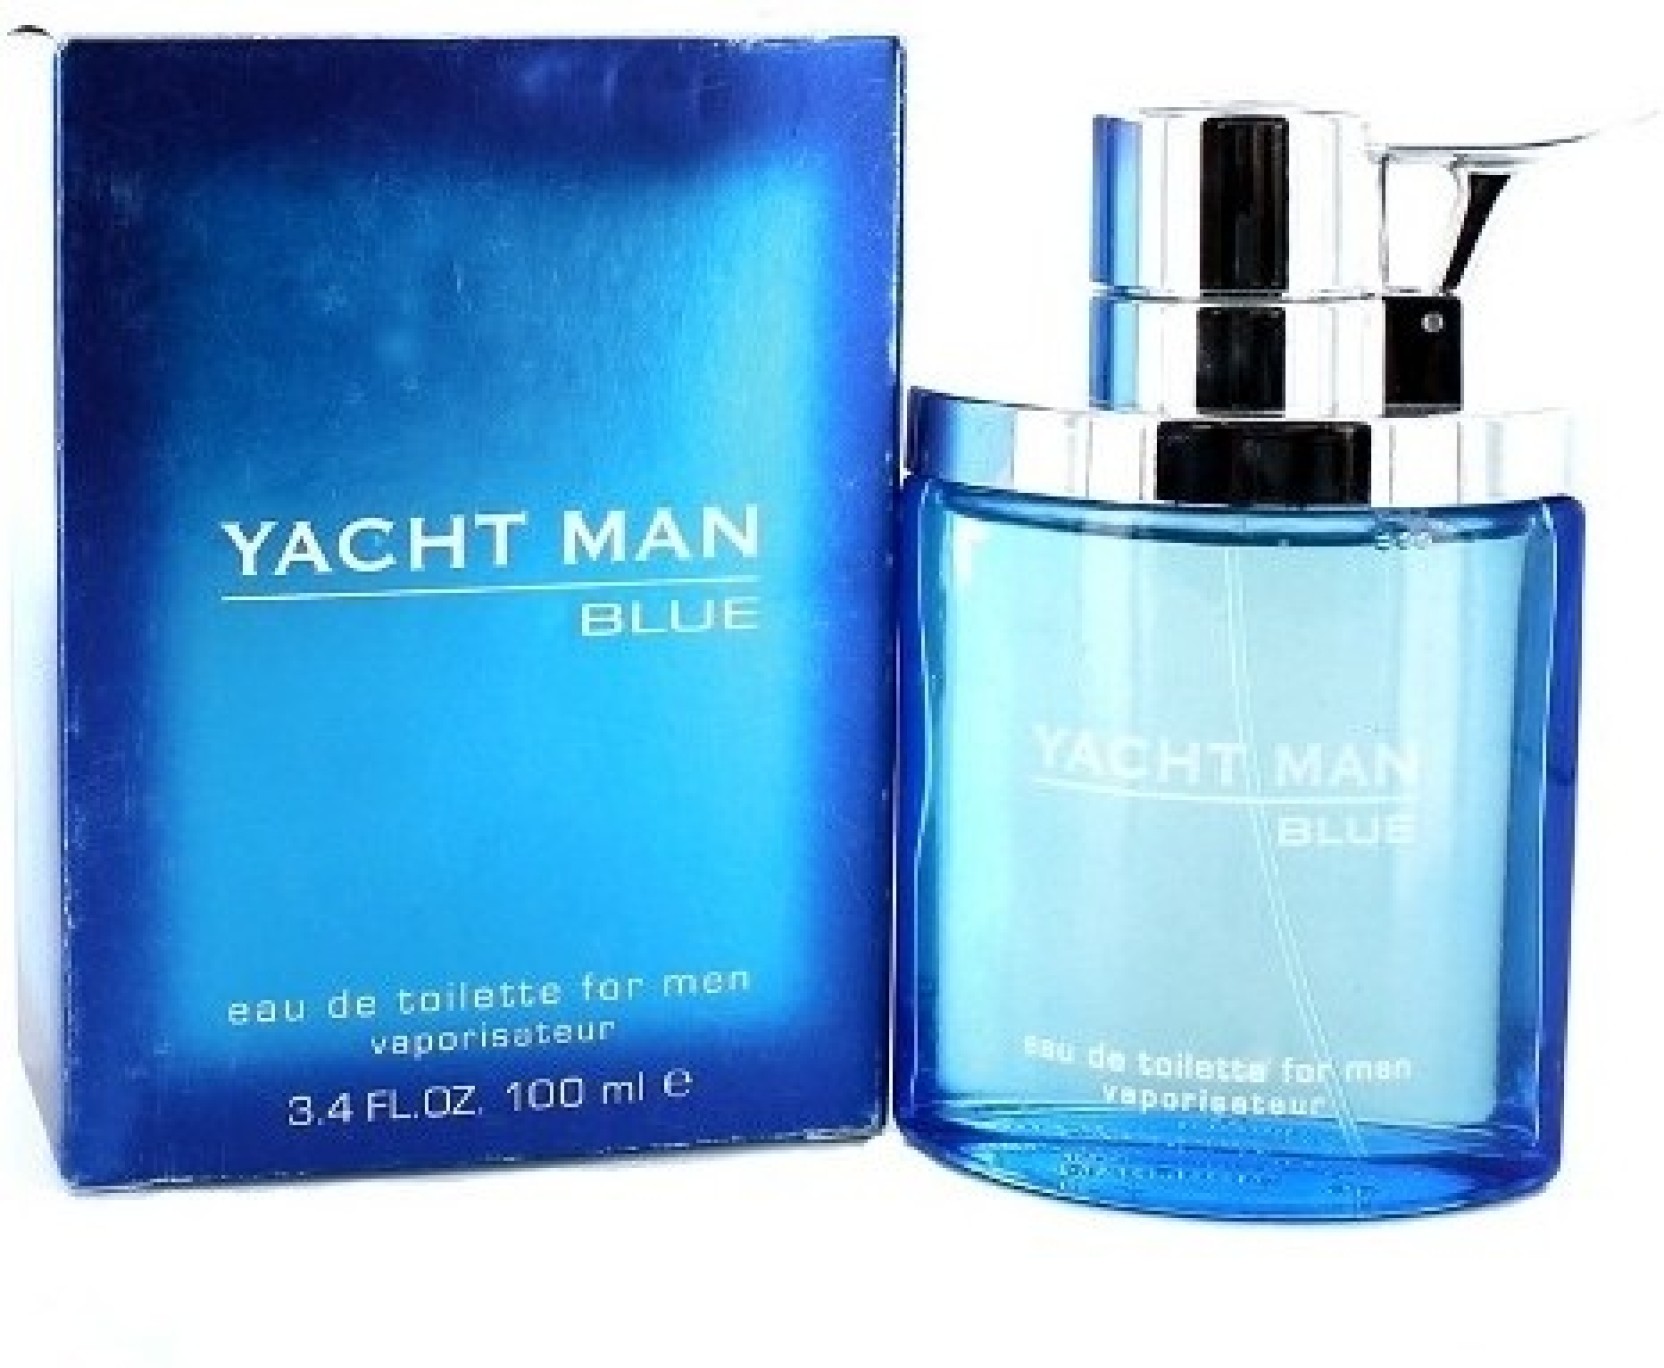 yacht man blue perfume price in india